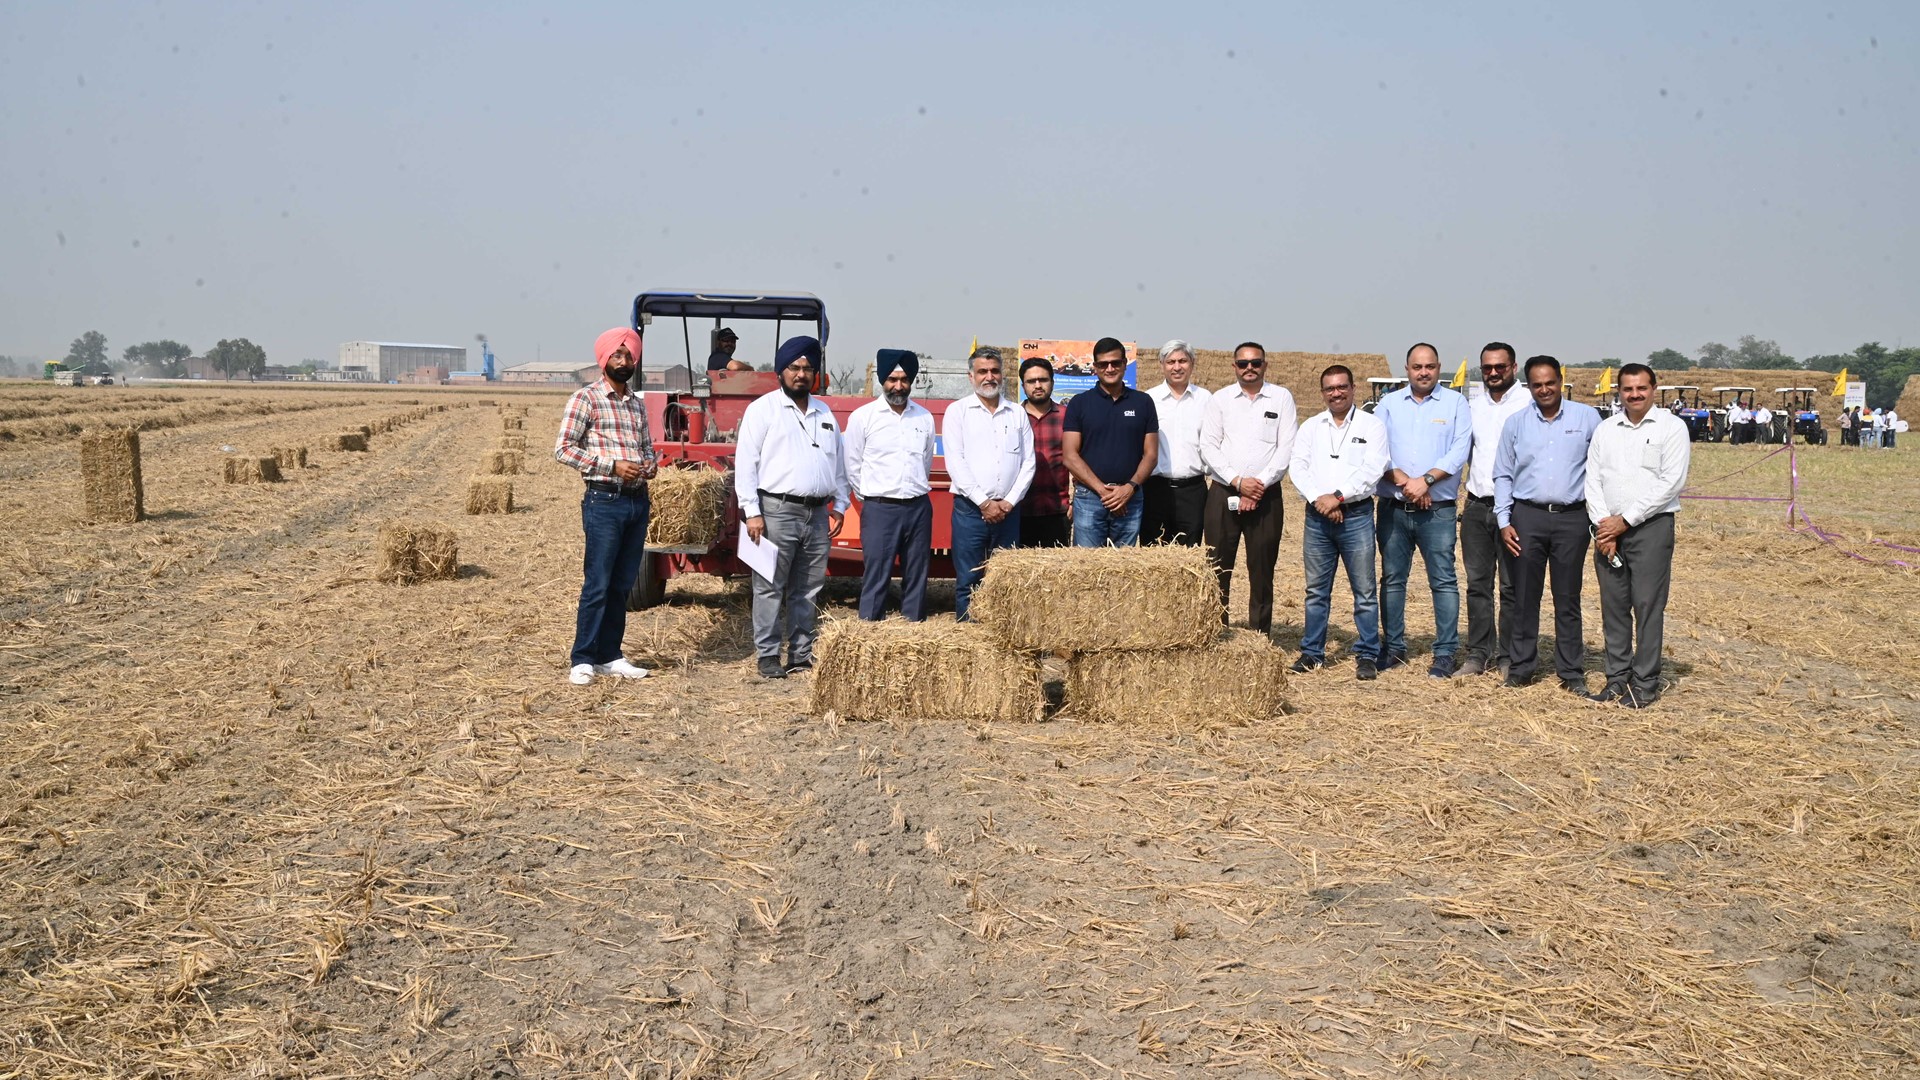 CNH Industrial's Straw Management Solution